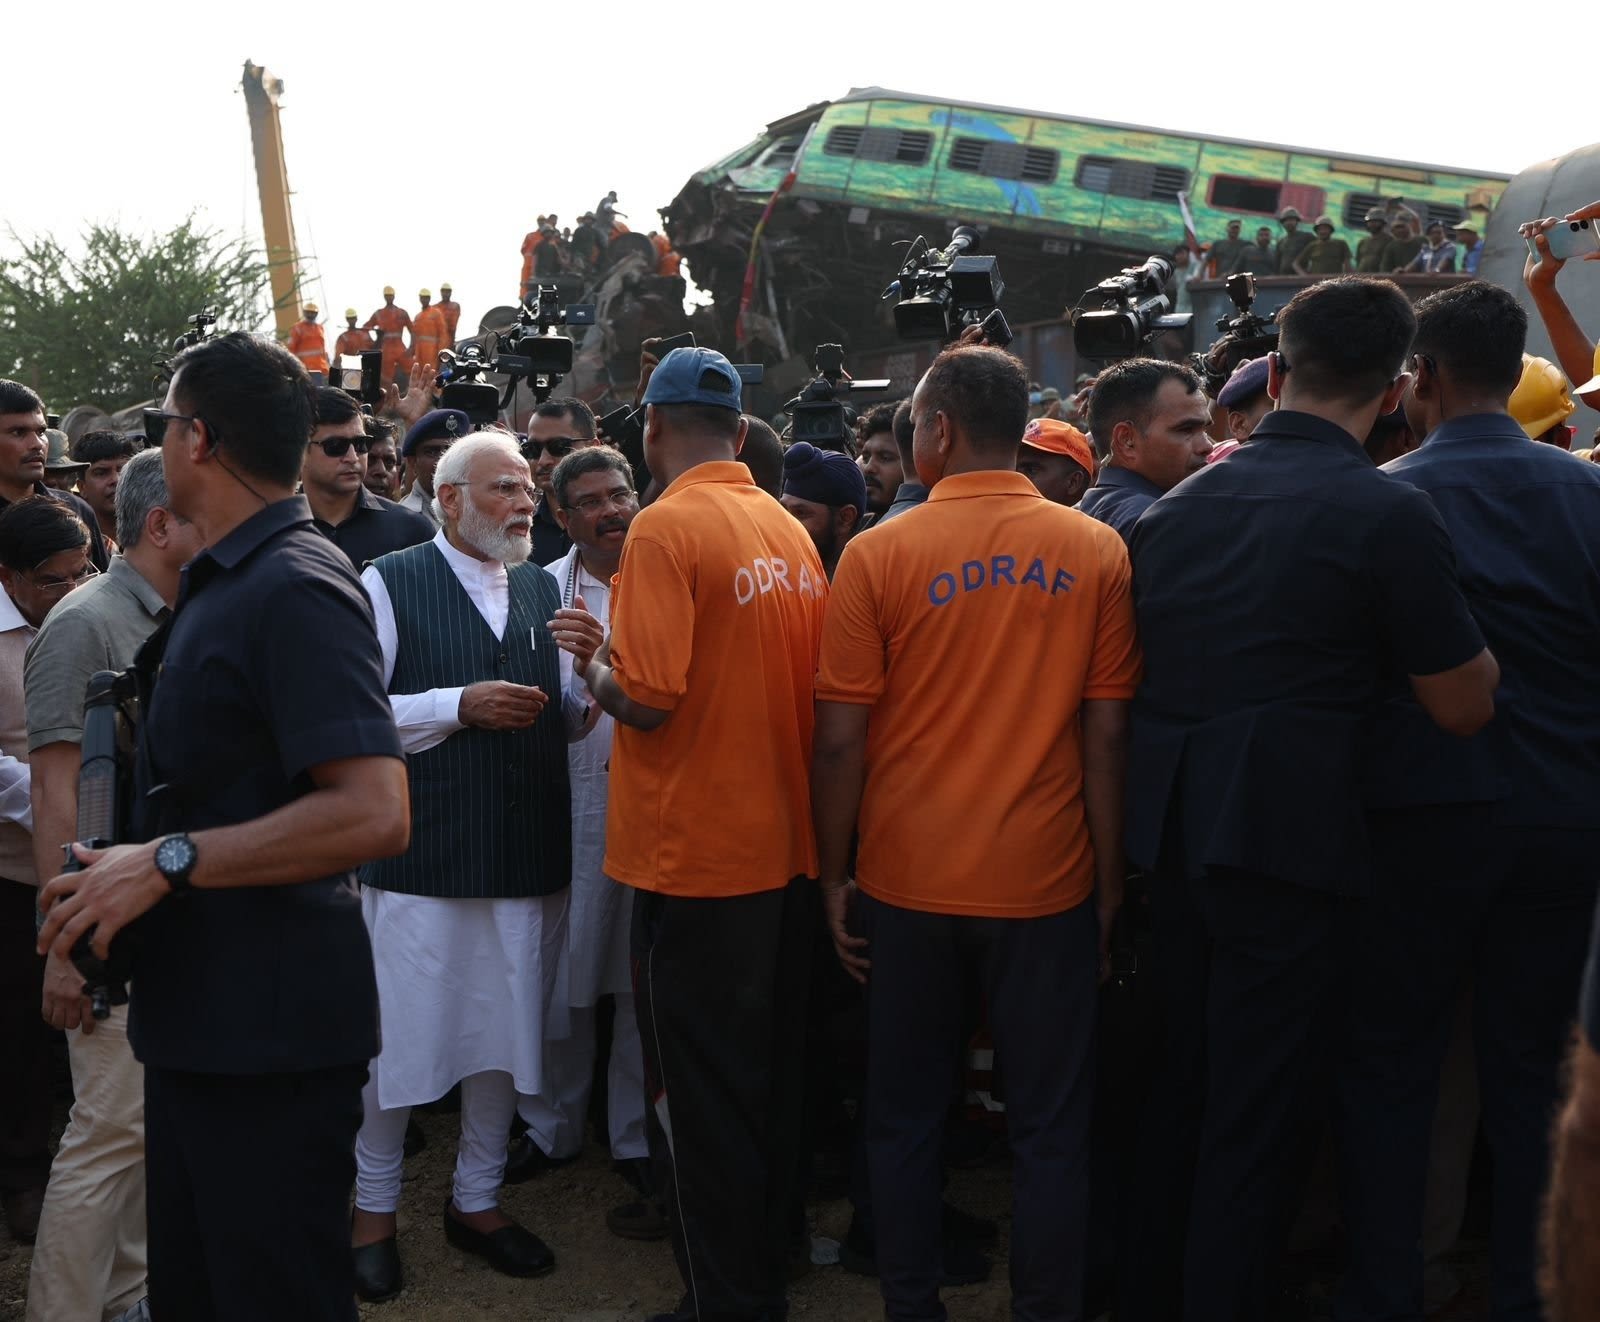 Deadly Indian rail crash shifts focus from new trains to safety